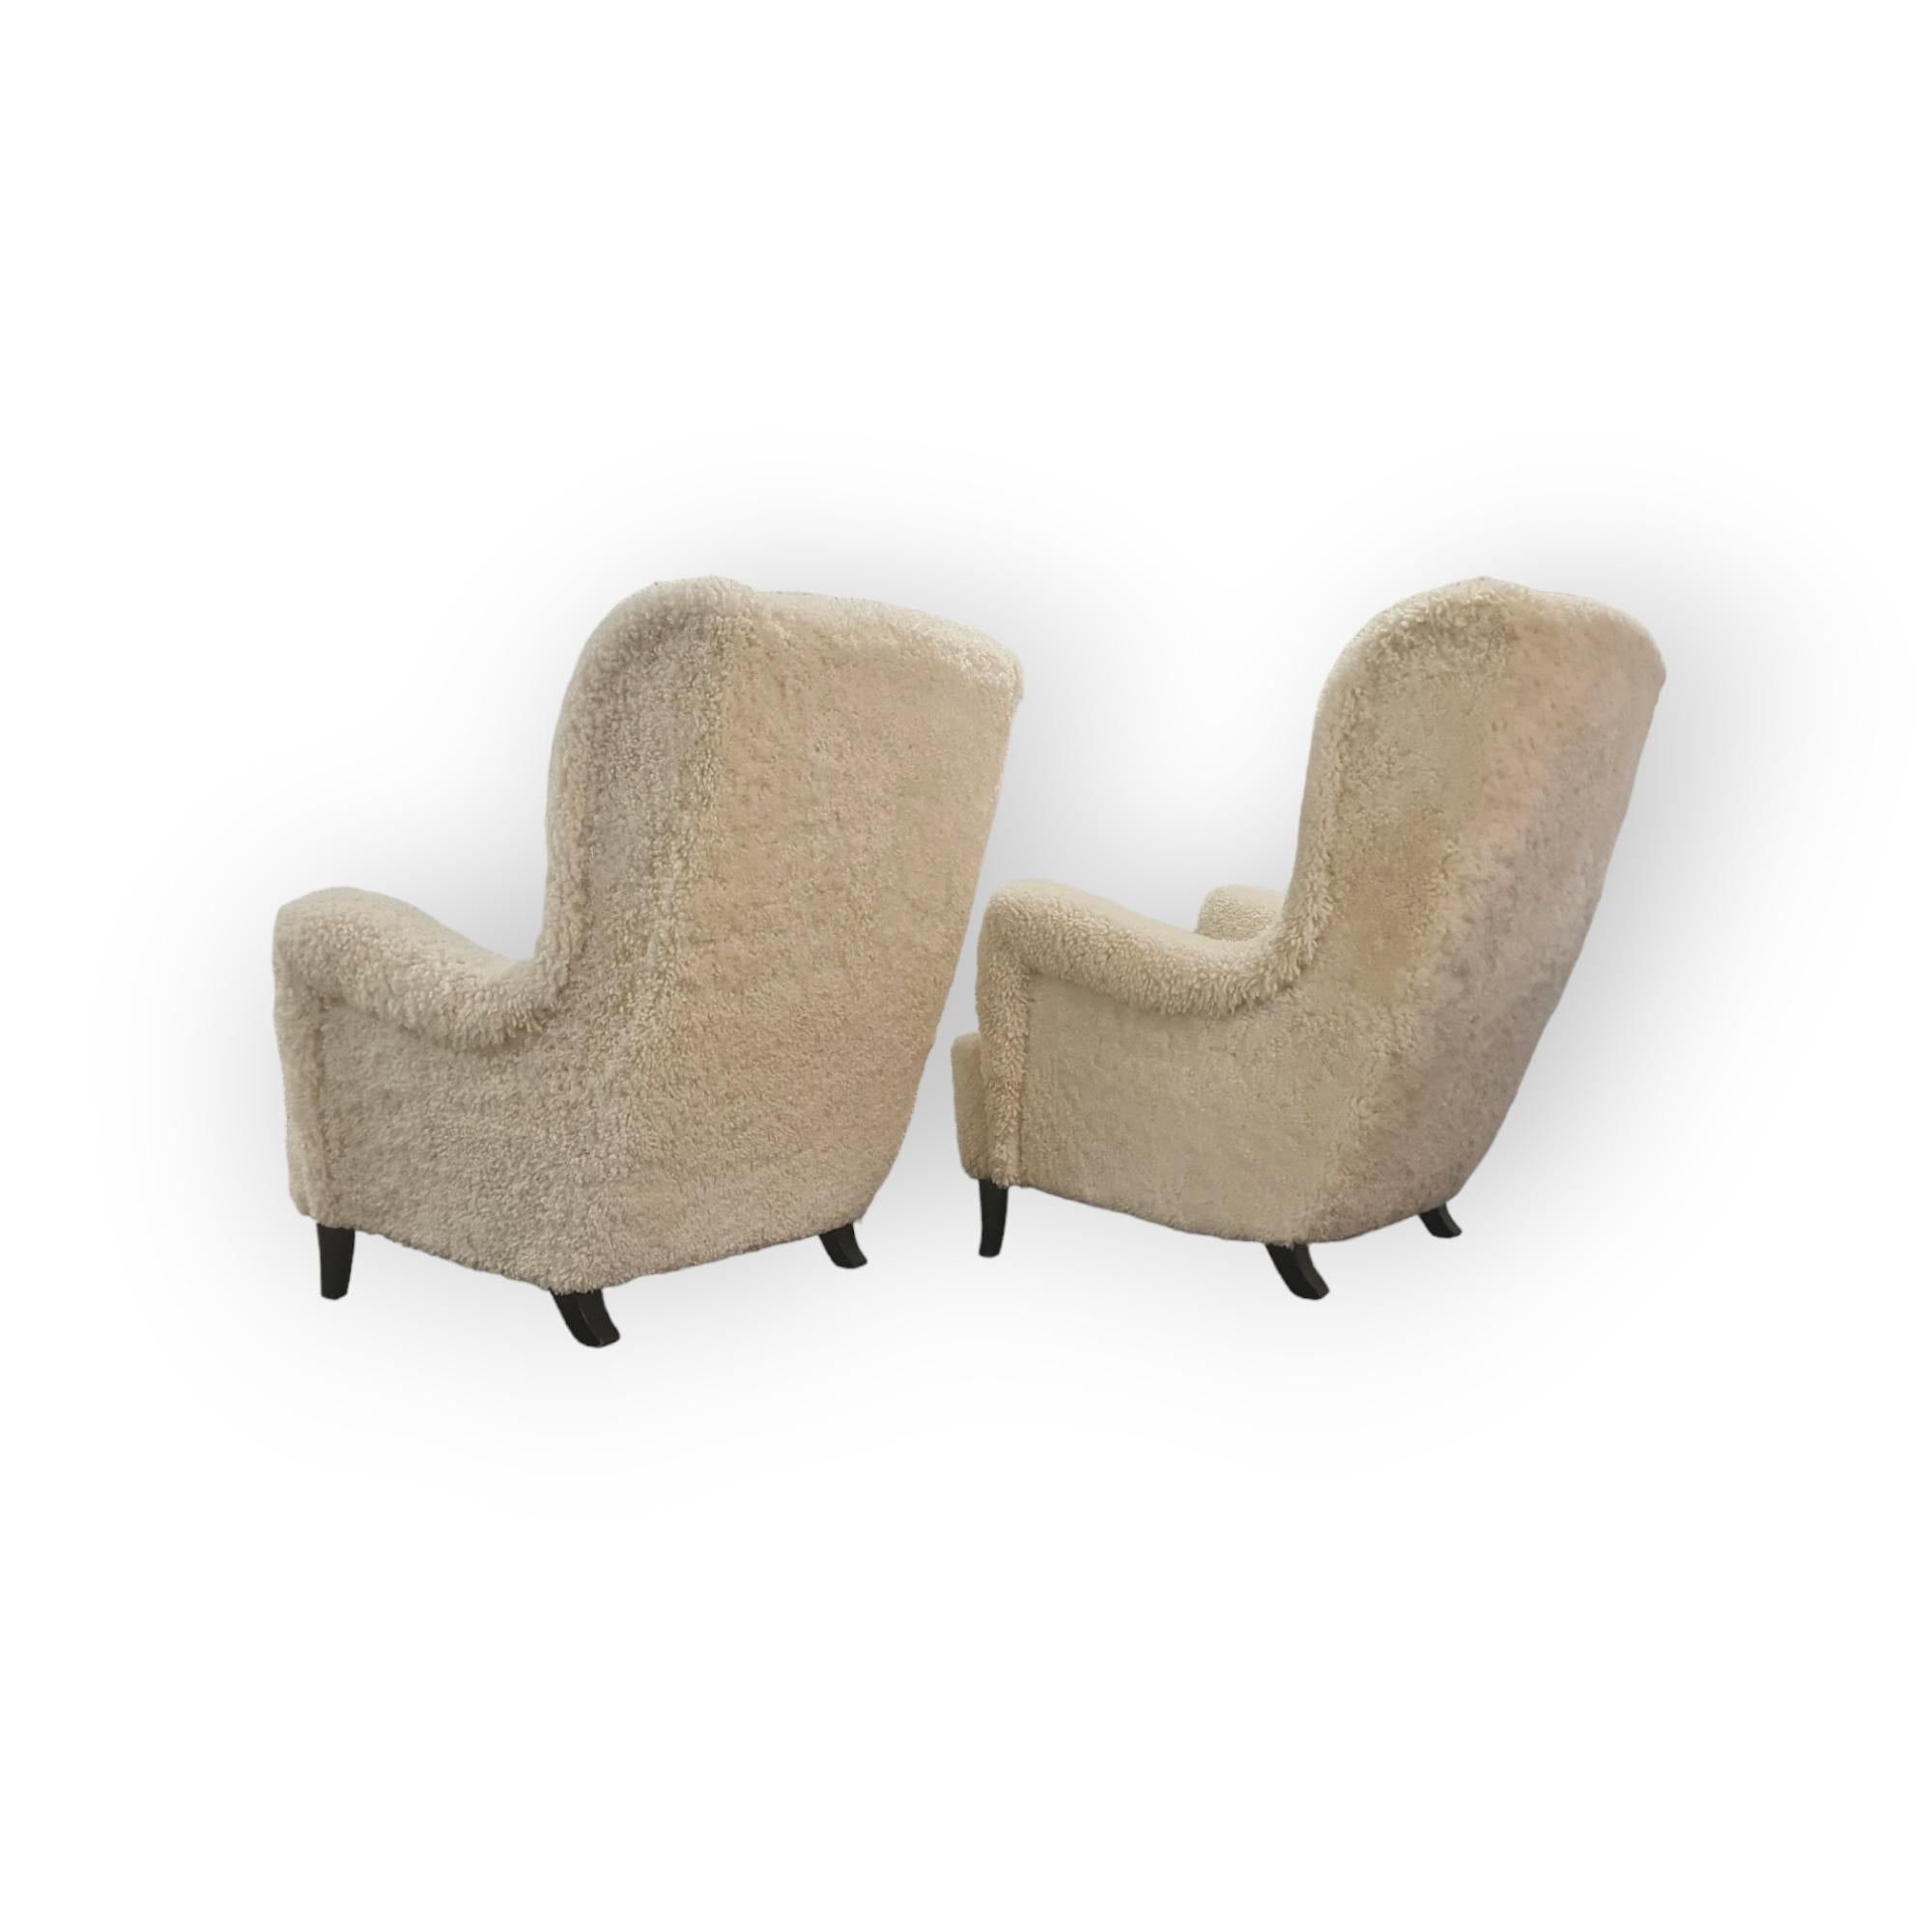 Mid-20th Century Pair of Large & Comfortable Finnish Highback Armchairs in White Sheepskin For Sale